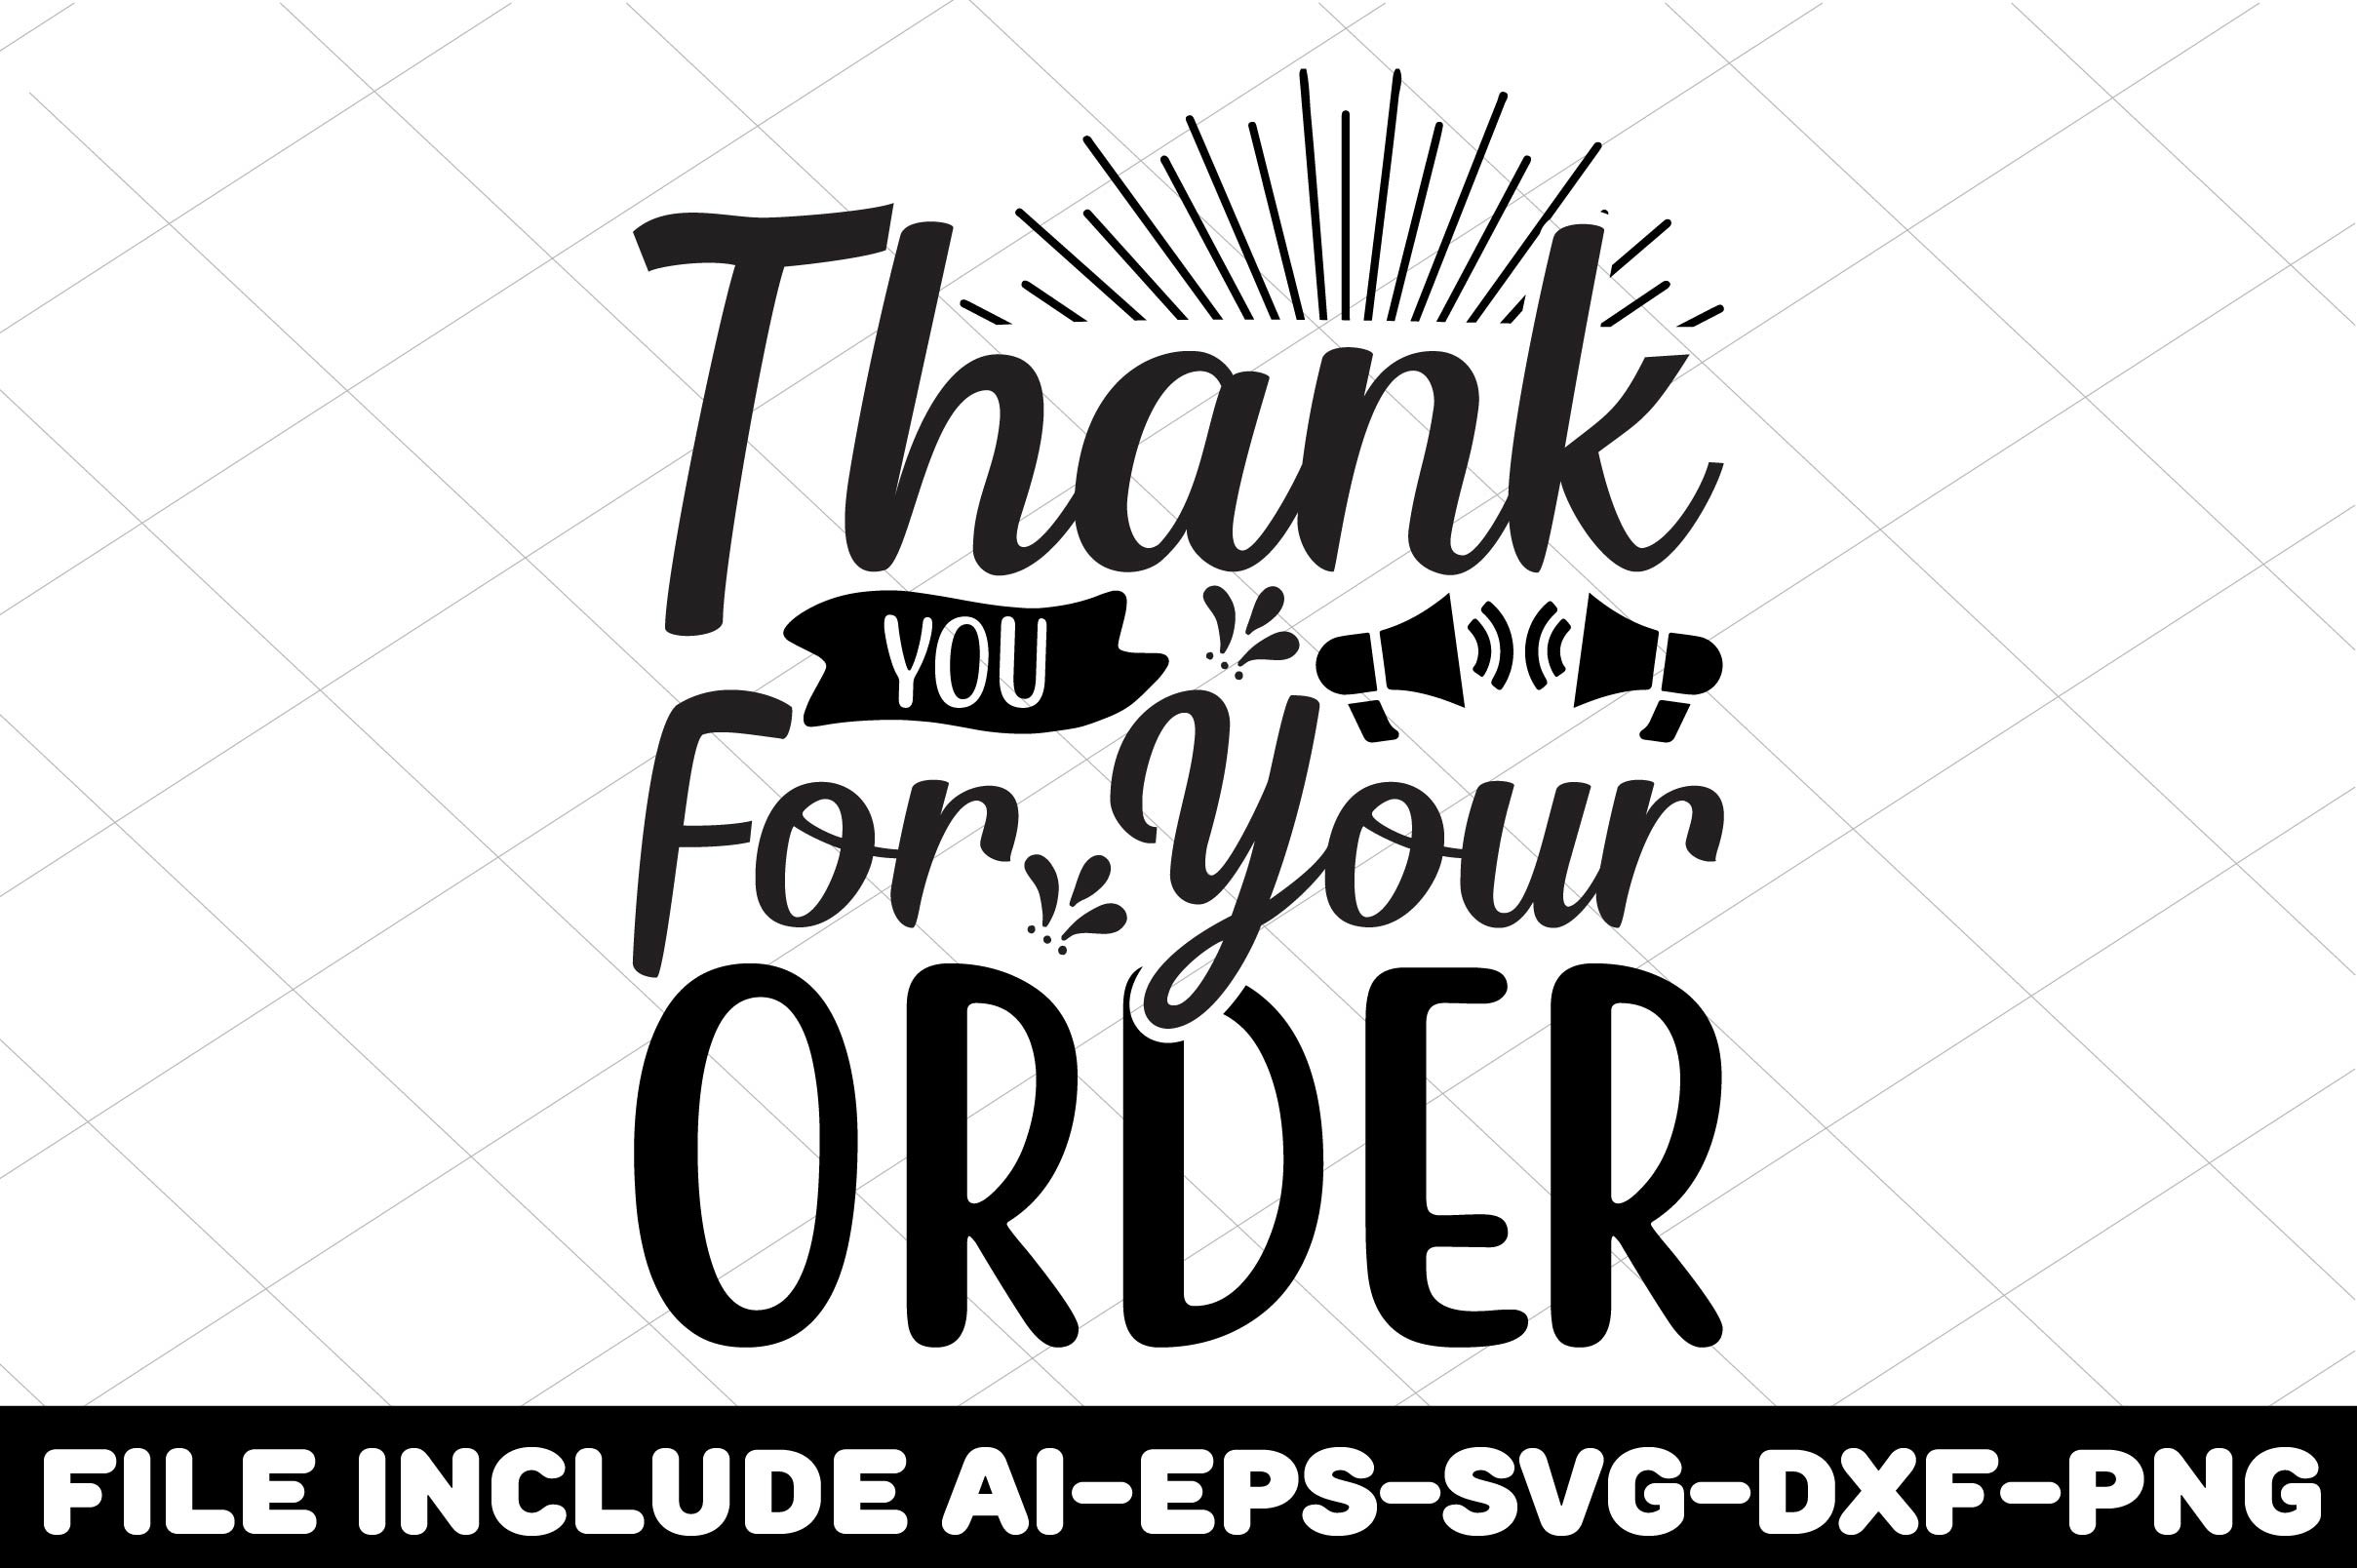 Thank You for Your Order Graphic by Crafthill260 · Creative Fabrica